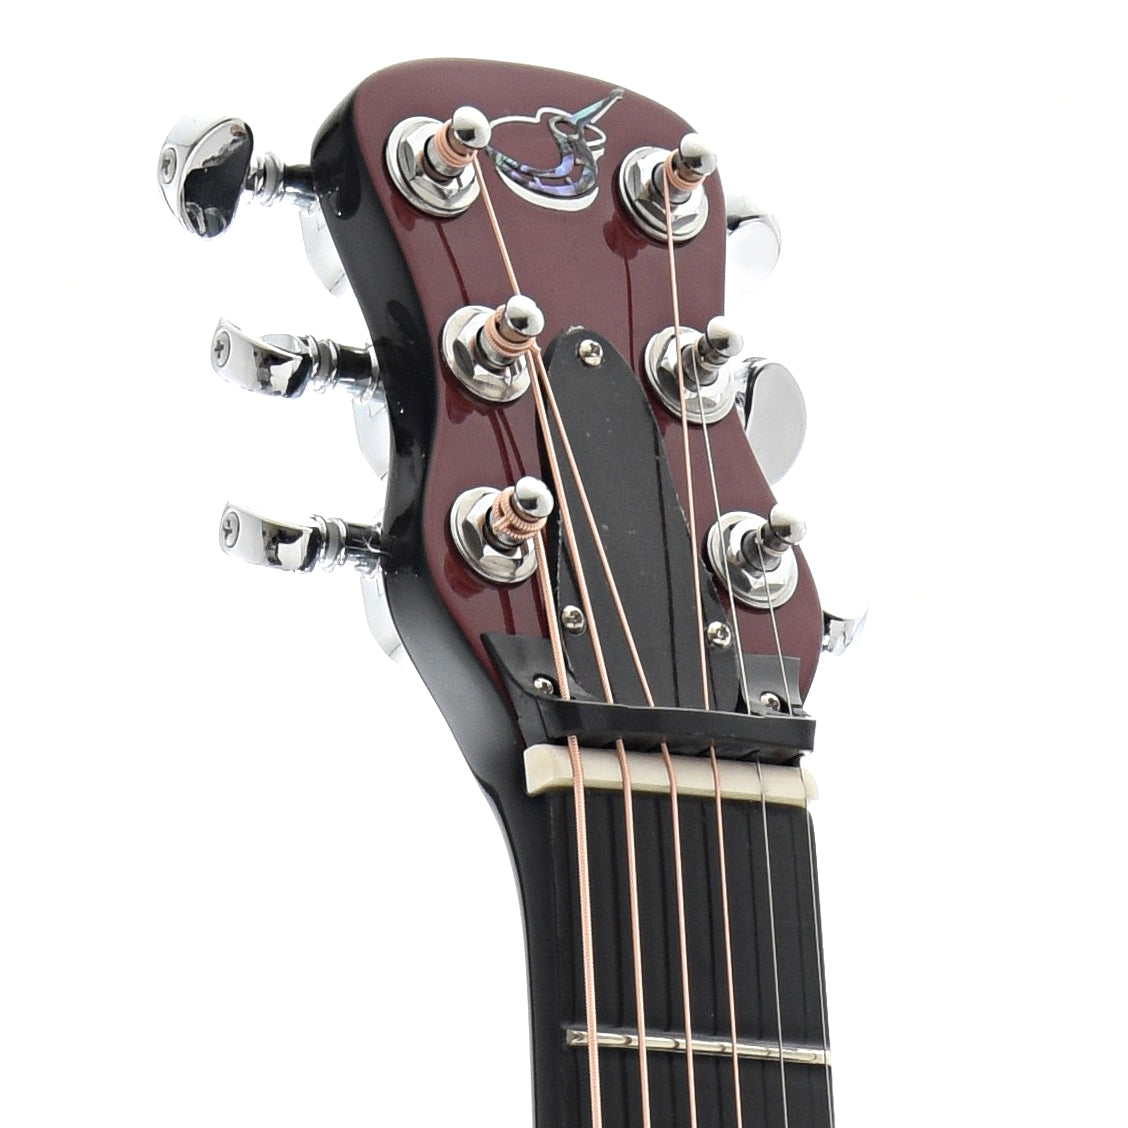 Image 6 of Journey Instruments OF660 Carbon Fiber Collapsible Travel Guitar with Gigbag, Burgandy Red Top - SKU# OF660CT-R : Product Type Flat-top Guitars : Elderly Instruments